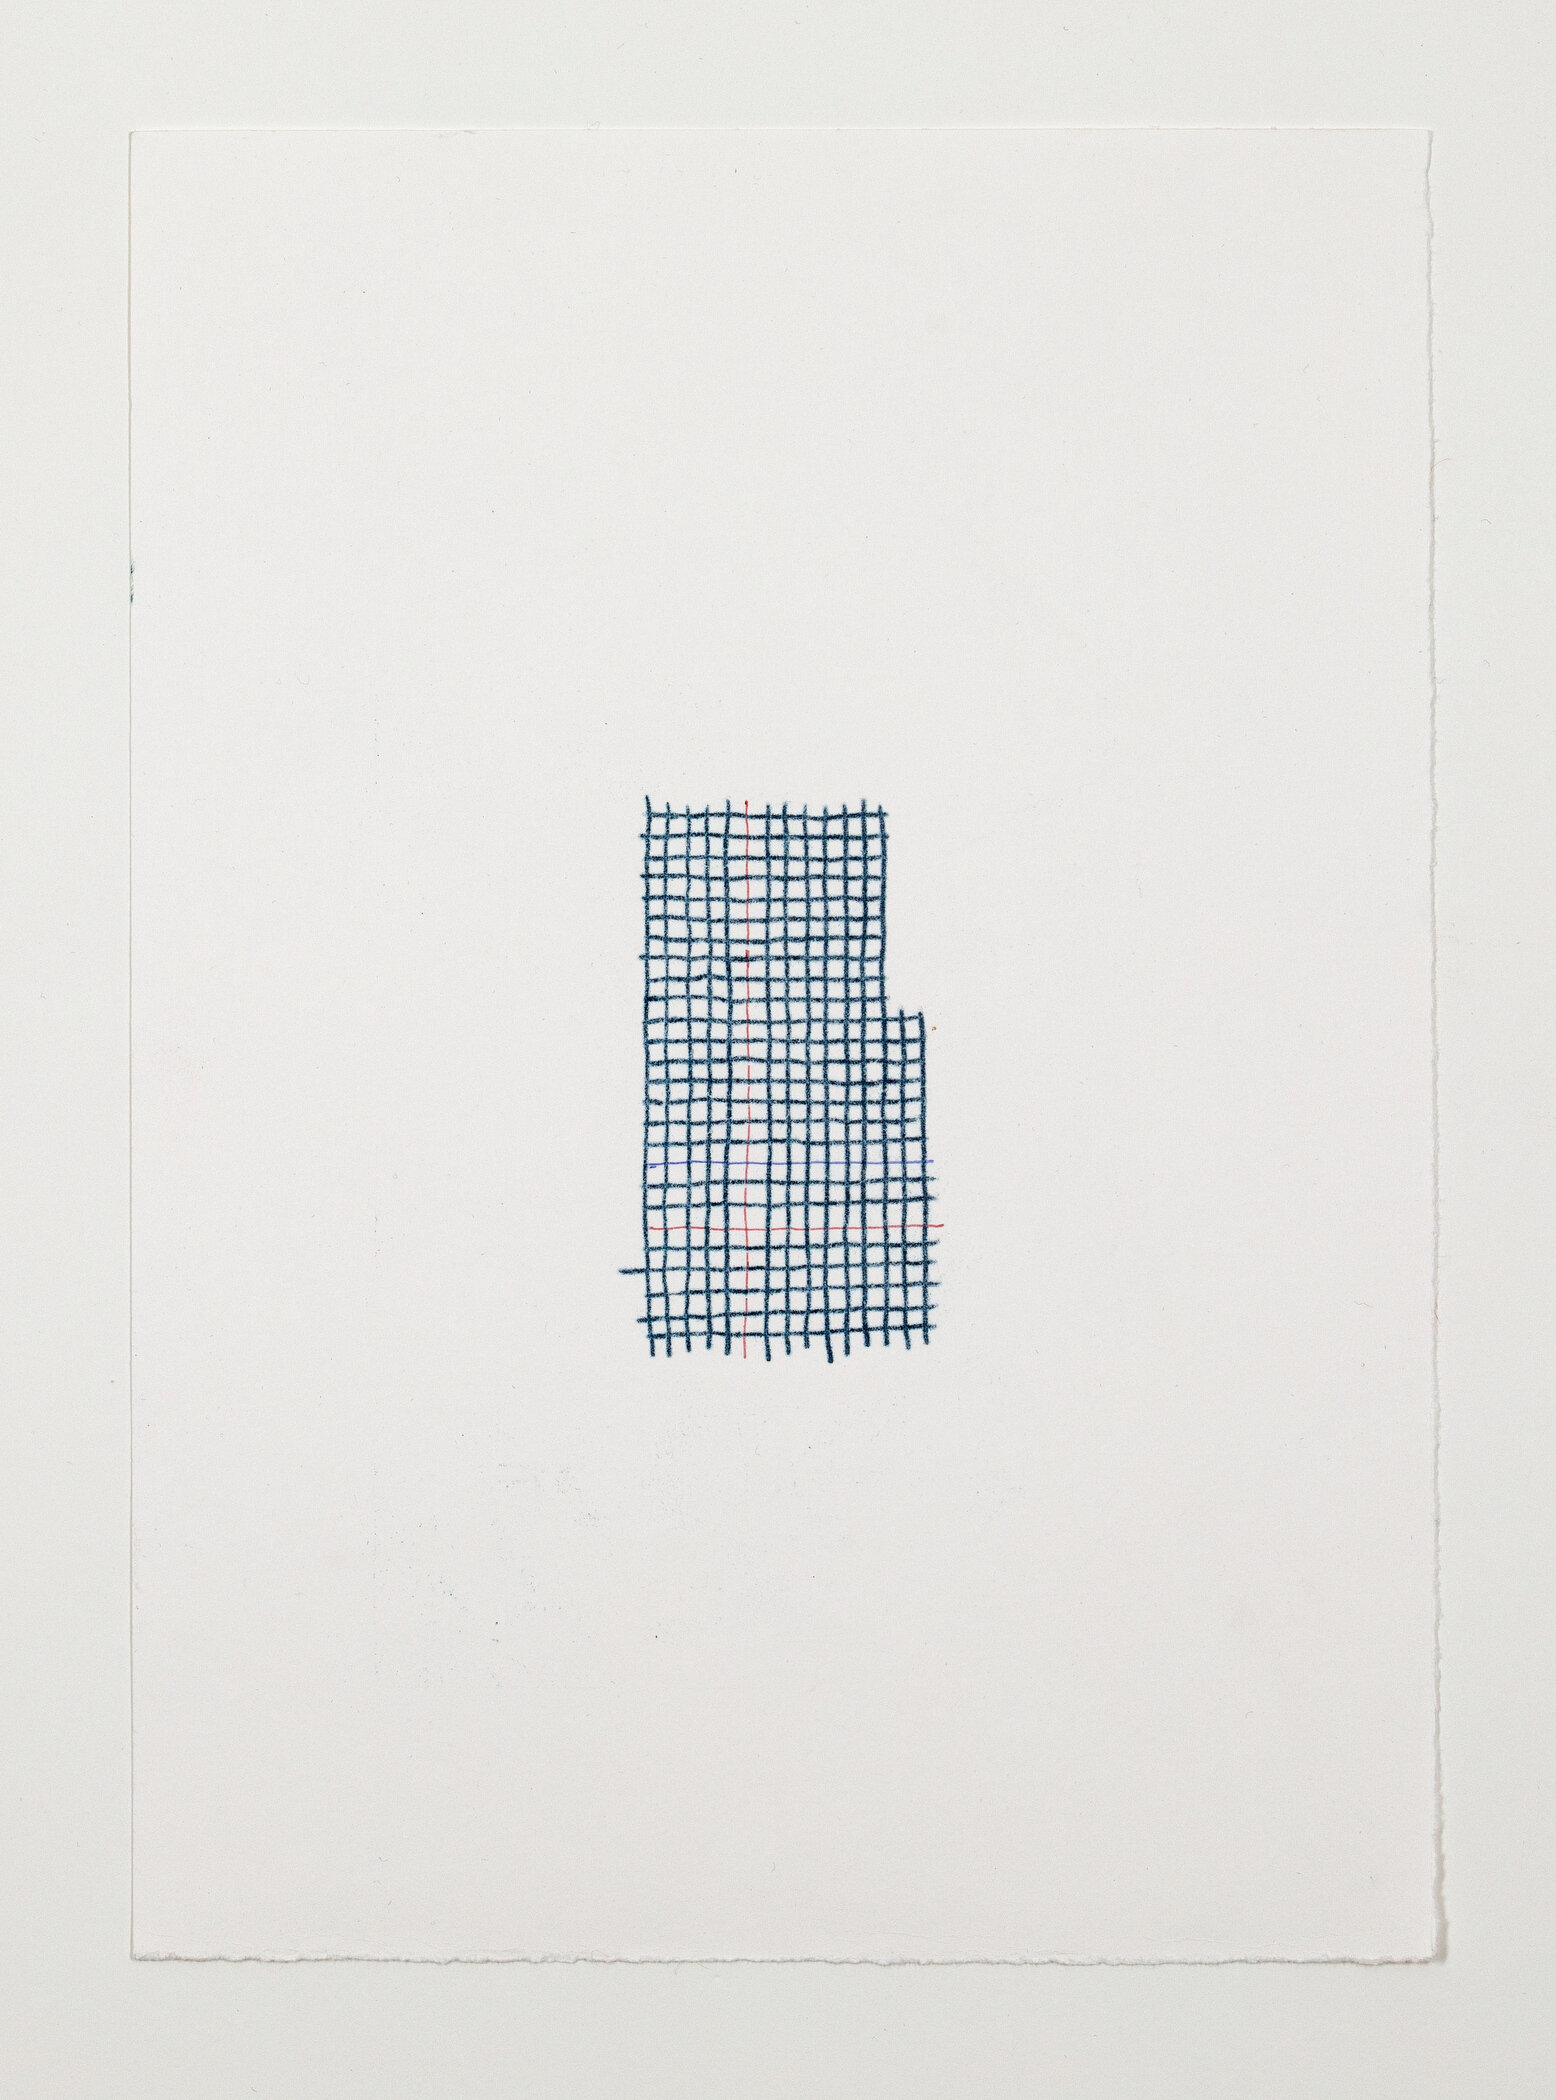  Camille Kersely  Known/unknown - Blueprint  2020 carbon, red pen, blue pen, on 220gsm drawing paper 30cm x 21cm 